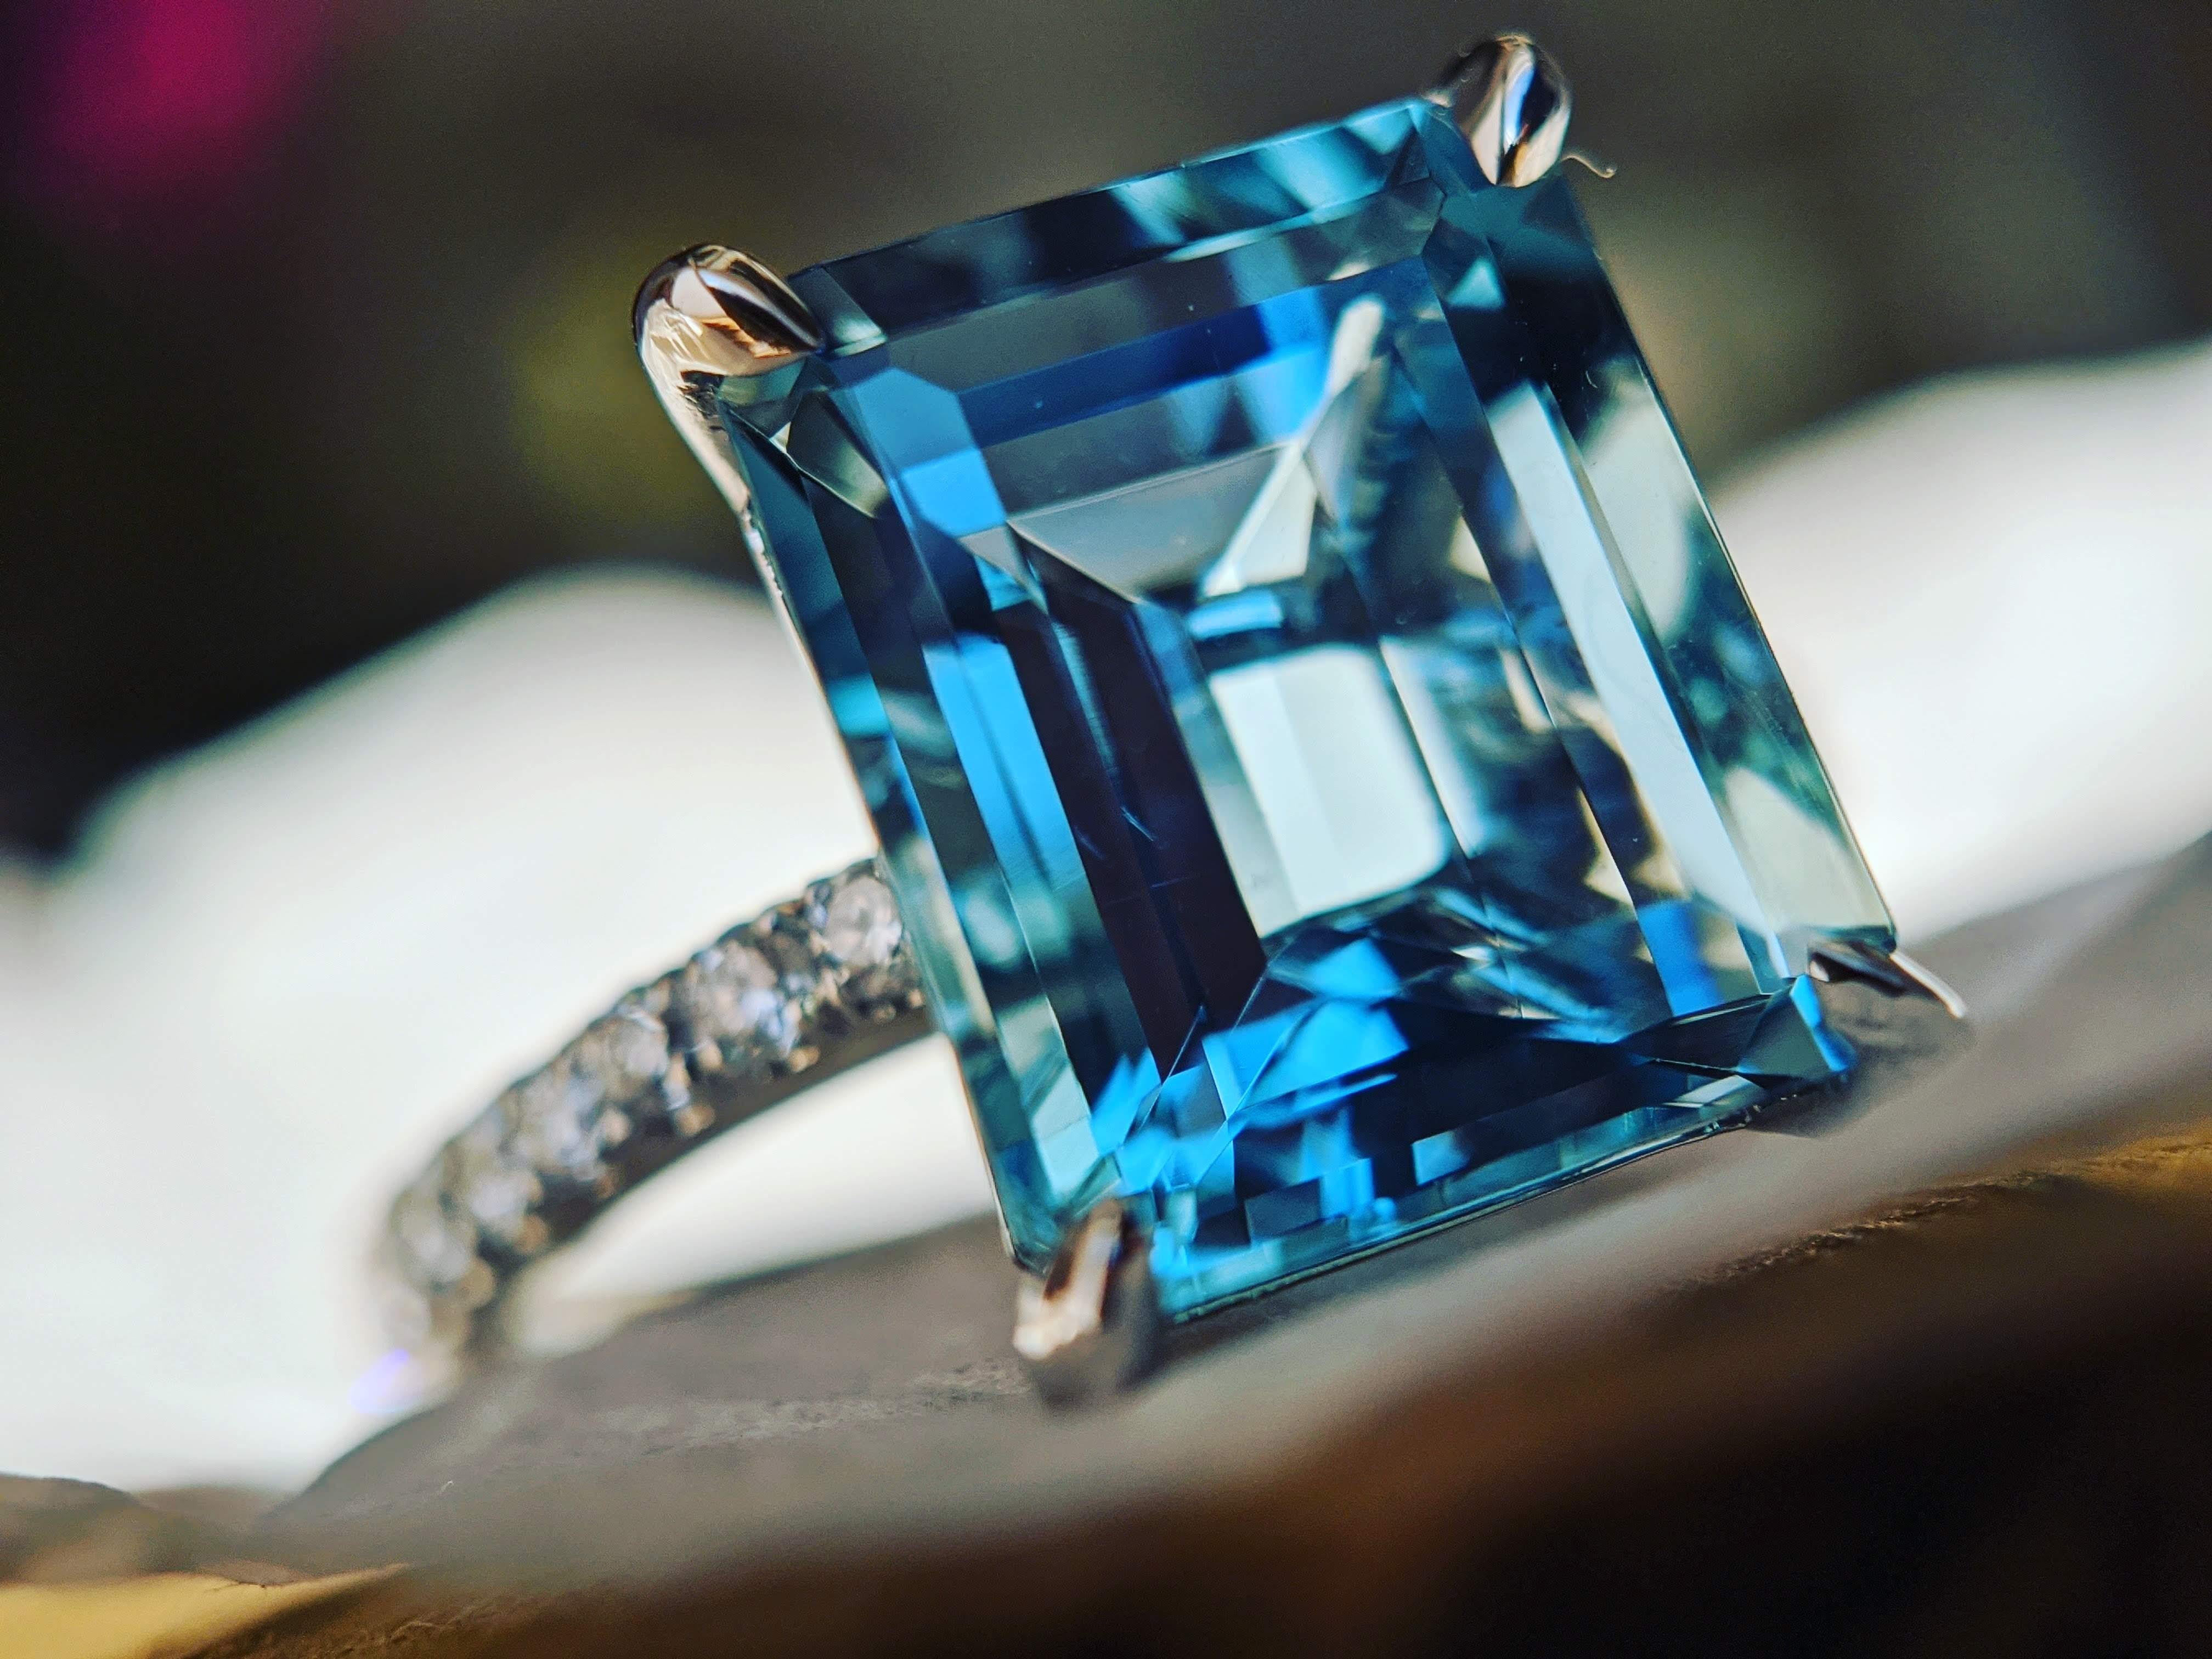 An exquisite 3.85 carat Aquamarine, emerald cut, very high quality color, eye clean gem, ethically mined and sourced, accompanied a pave' of bright diamonds of approximately  total carat weight of 0.38 carat, set in an hand crafted, delicate and